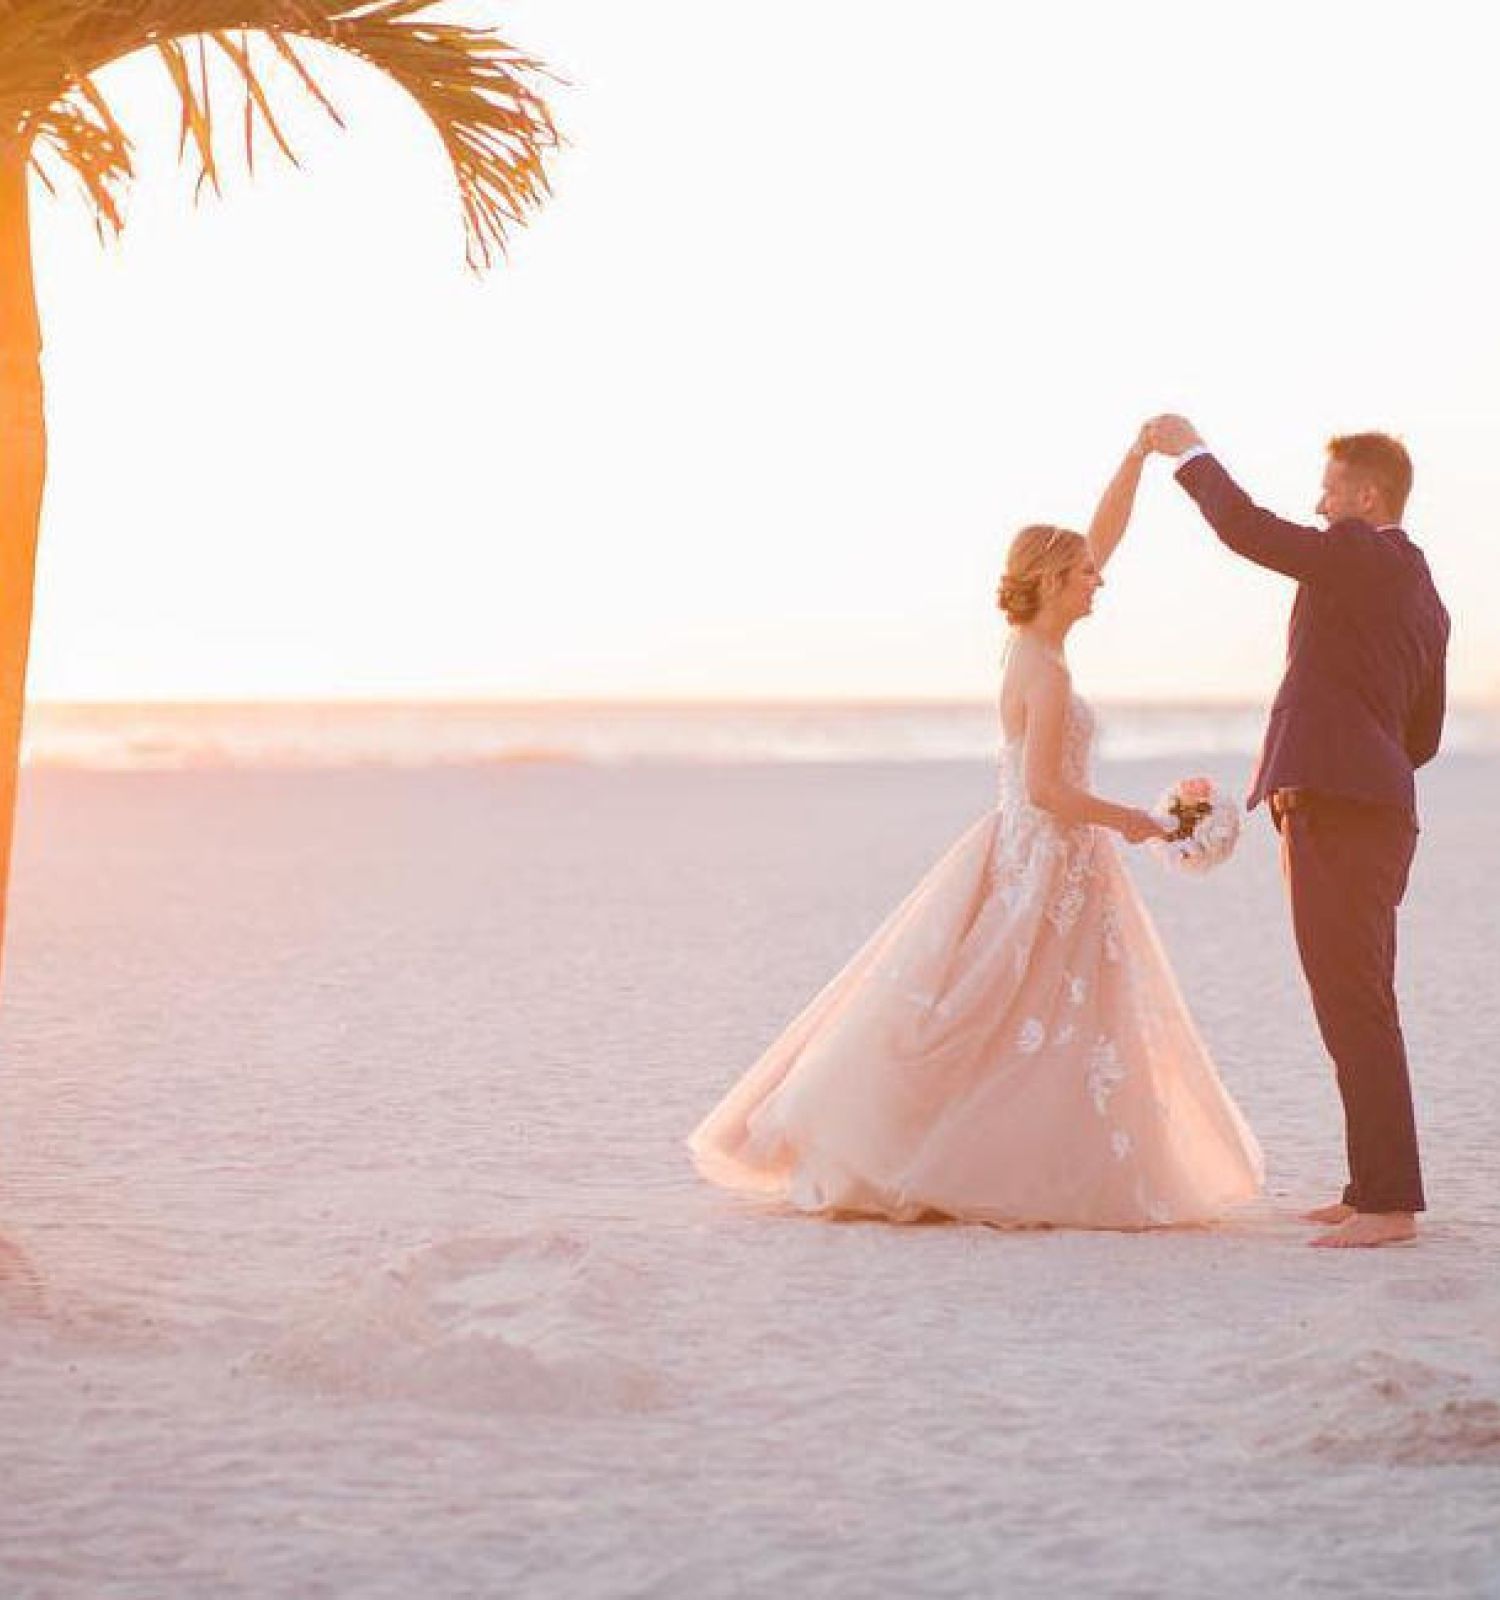 A couple is dancing on a sandy beach at sunset, surrounded by palm trees, with the bride wearing a gown, and the groom in formal attire.